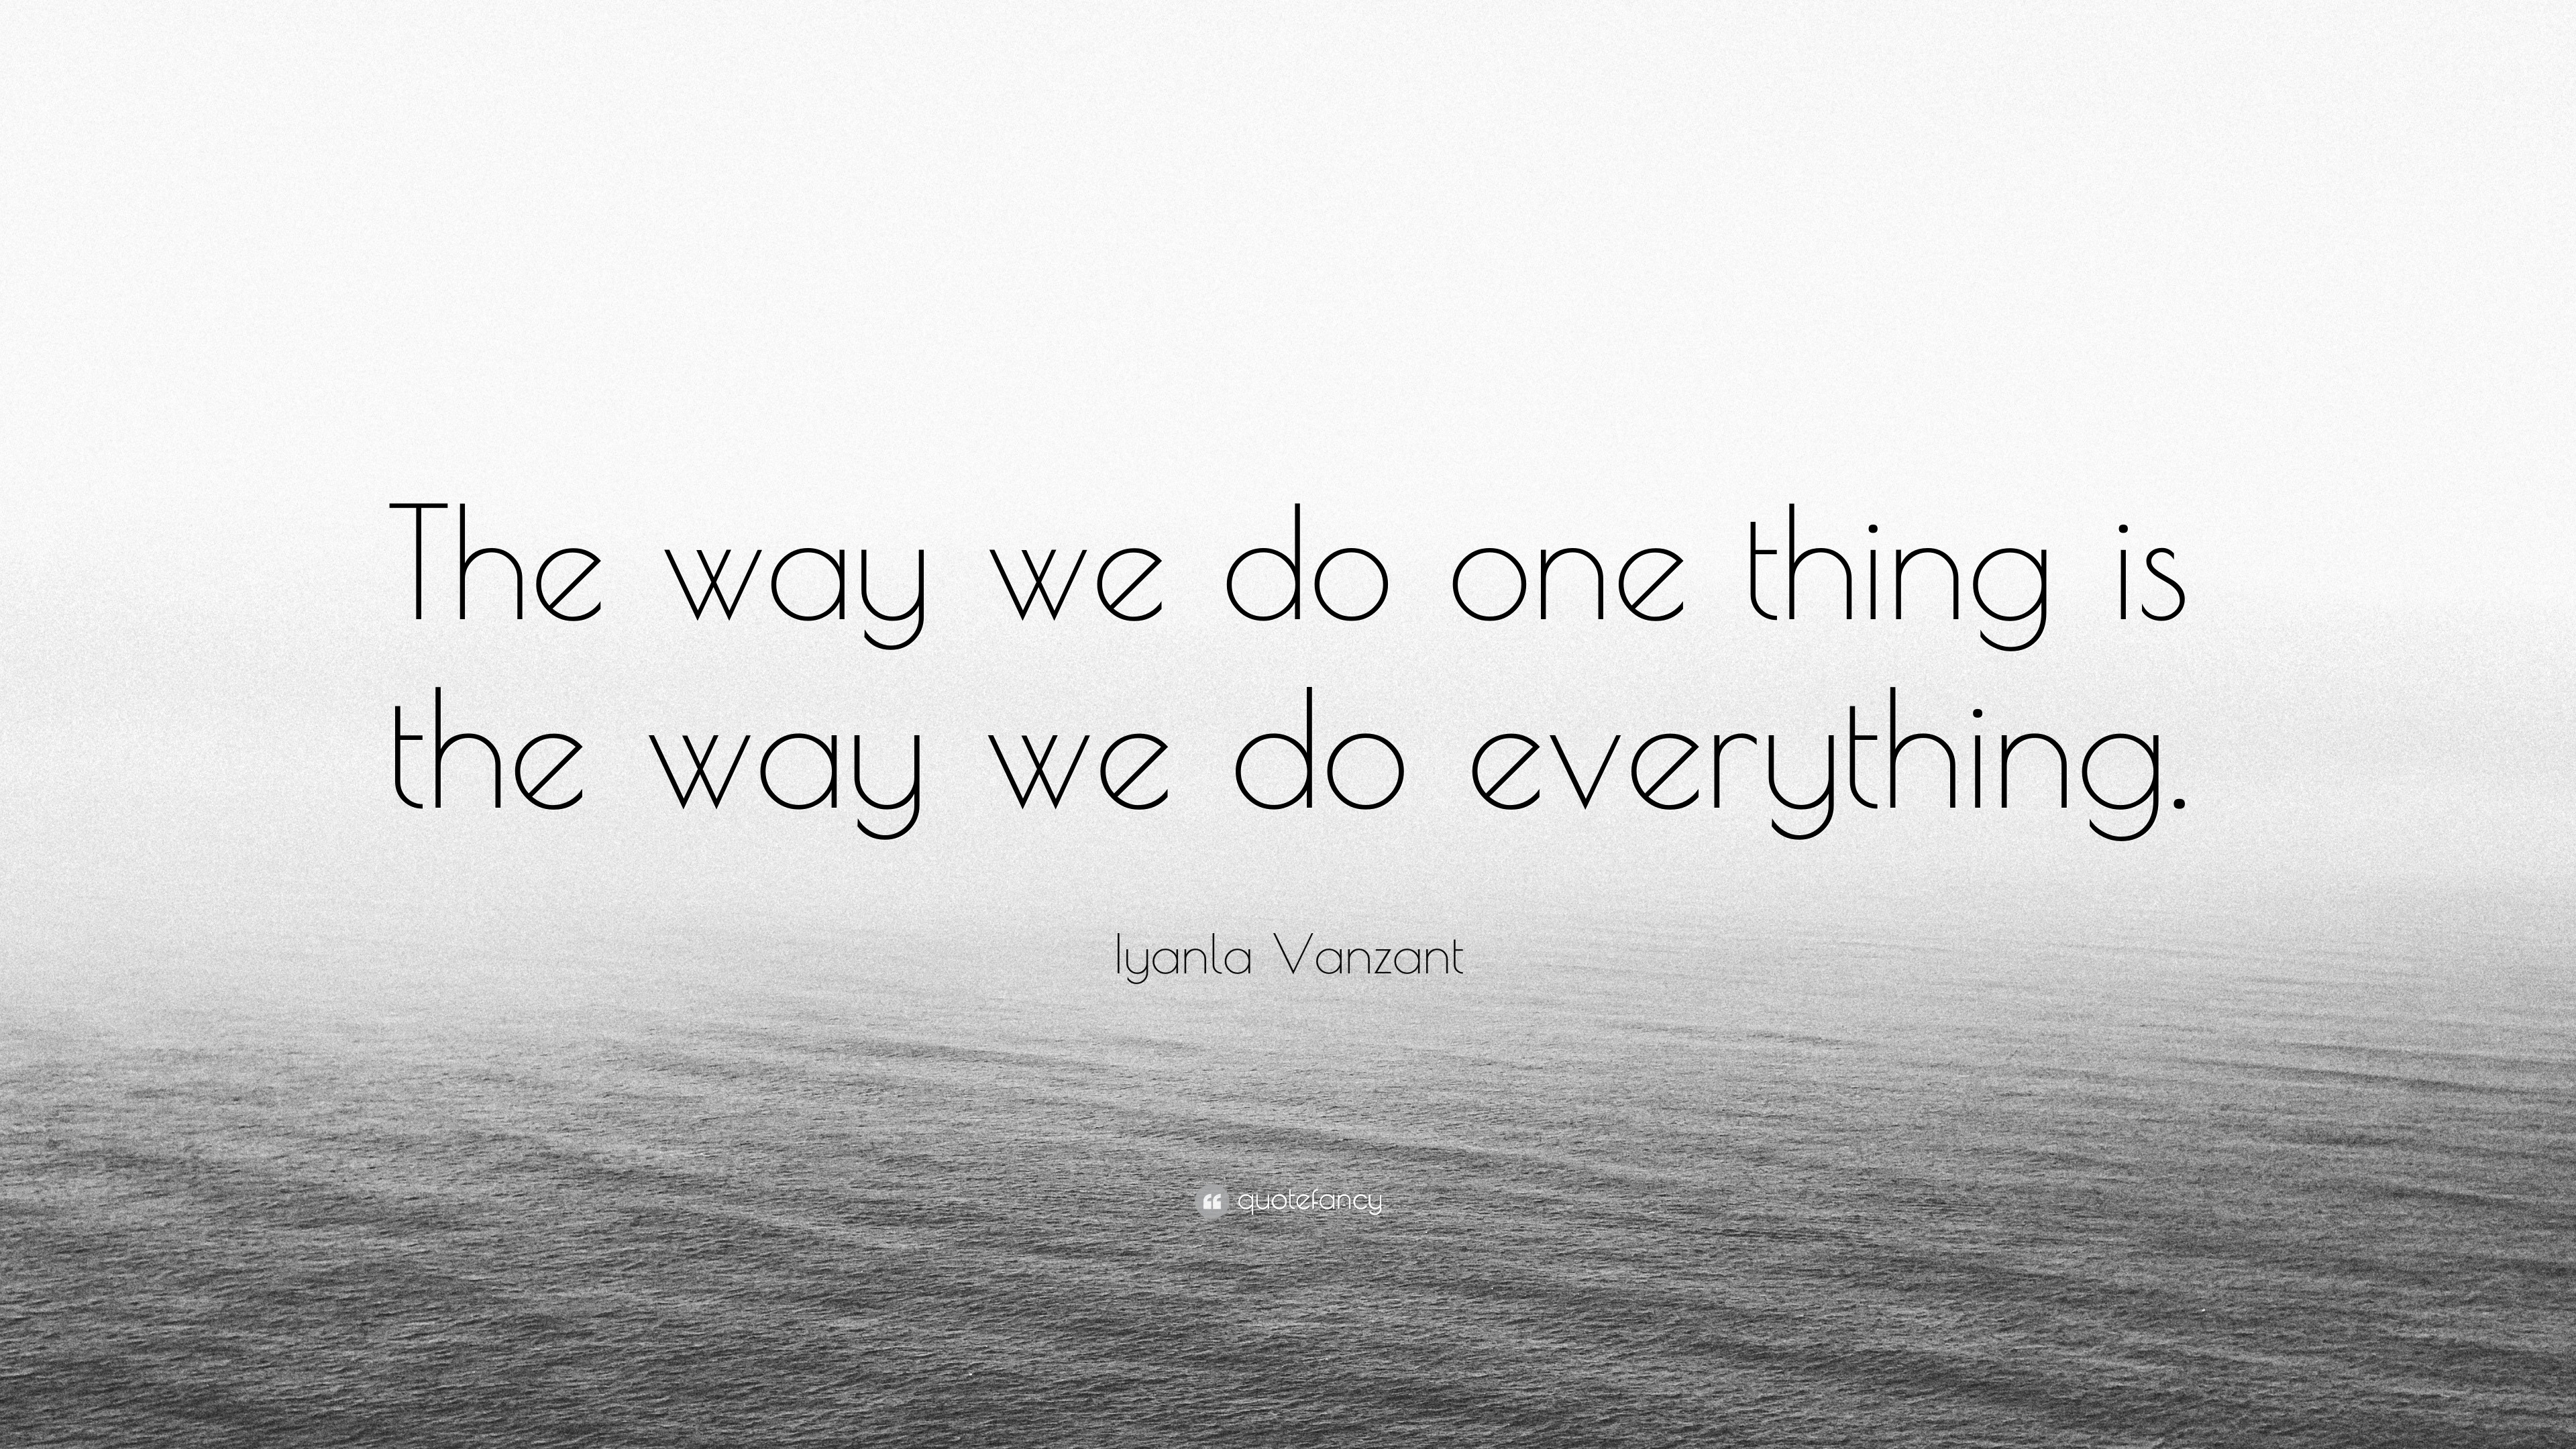 2393009 Iyanla Vanzant Quote The way we do one thing is the way we do